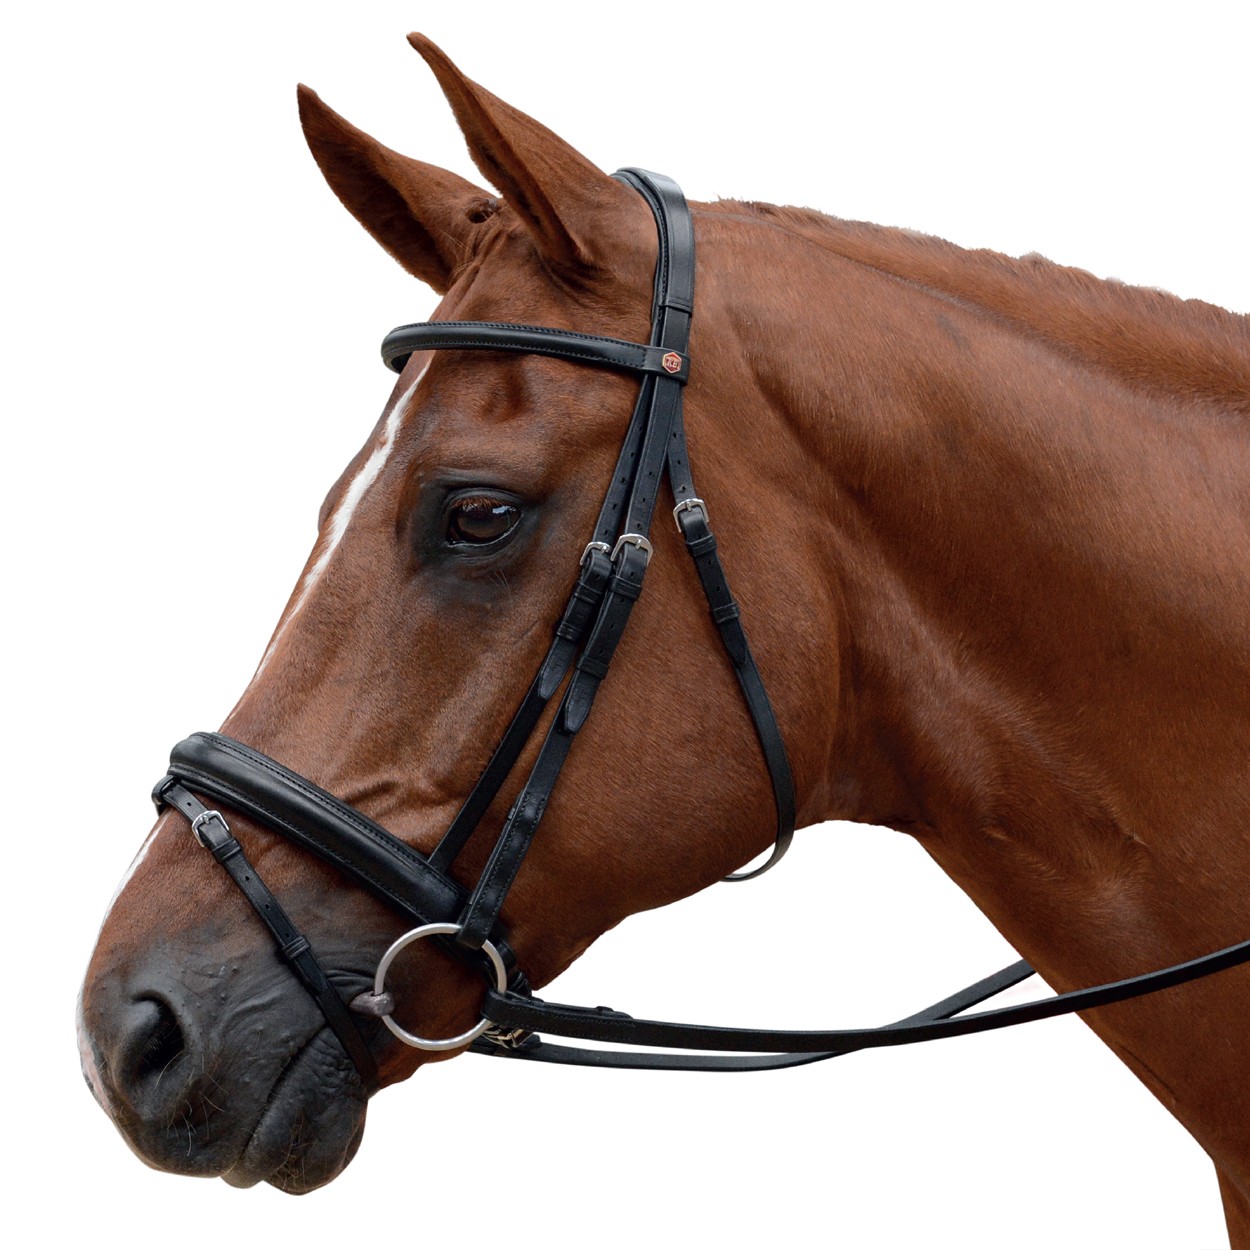 How Tight Should A Flash Noseband Be?